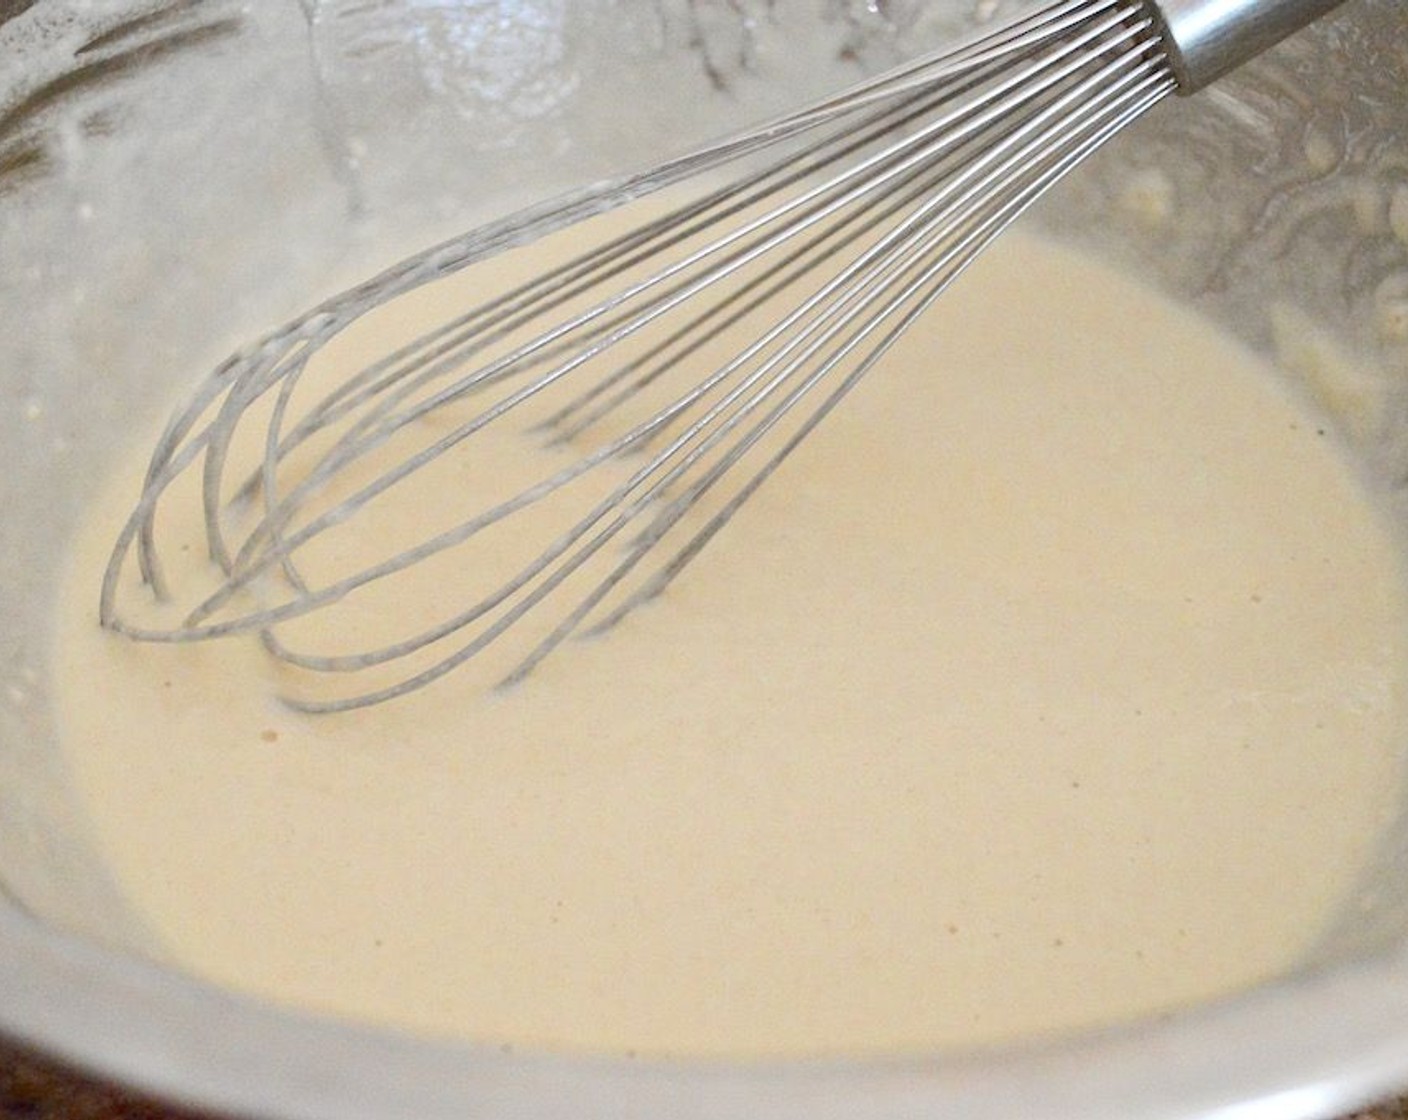 step 1 Whisk All-Purpose Flour (2 cups), Baking Powder (1 tsp), and Salt (1 tsp) together in a large mixing bowl to aerate them. Then whisk in Honey (2 Tbsp), followed by the cold Soda Water (2 1/4 cups). Whisk it all together thoroughly until it is smooth, then refrigerate it until you are ready to fry.